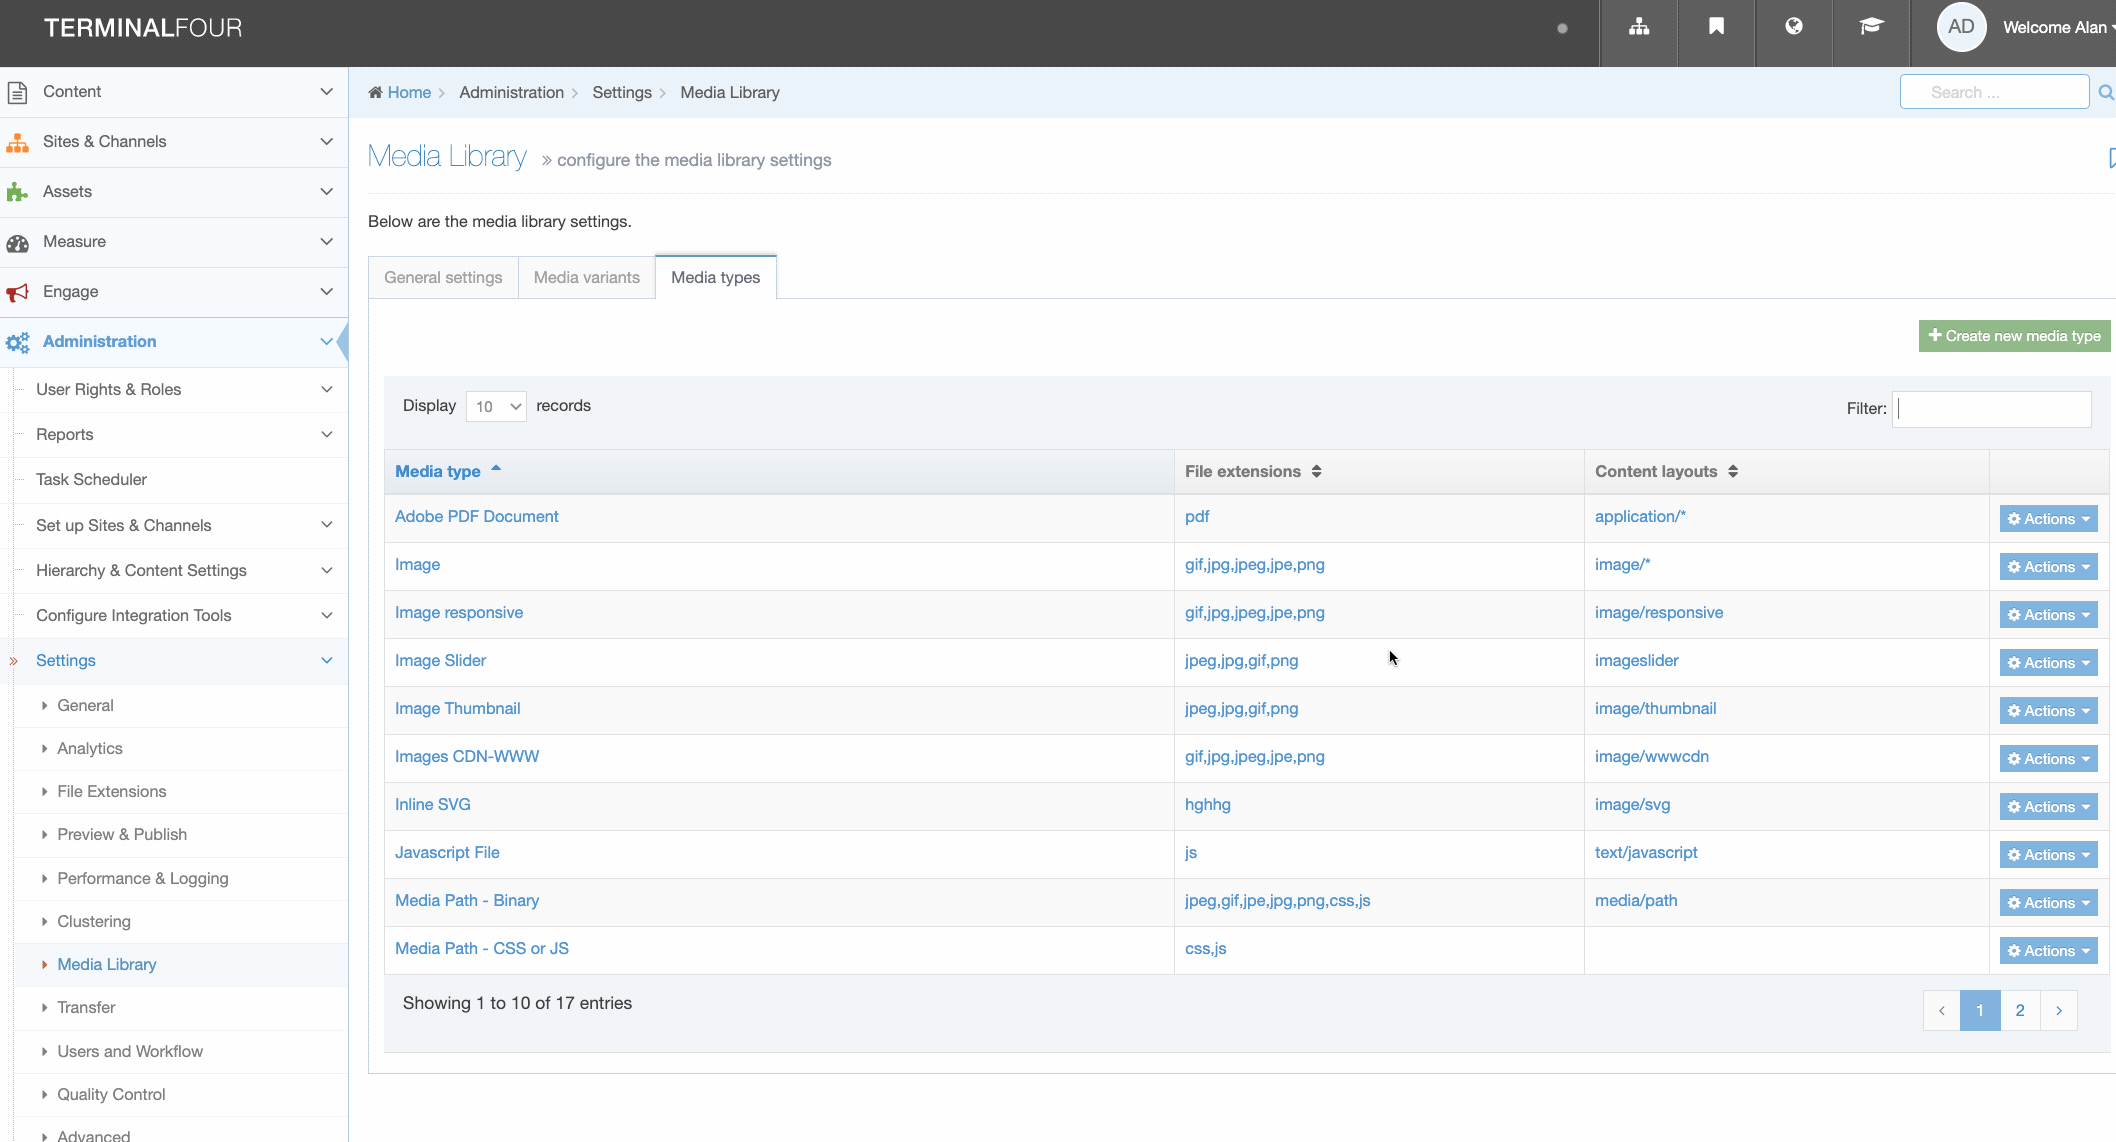 Searching for the required Media Types for Dashboard installation